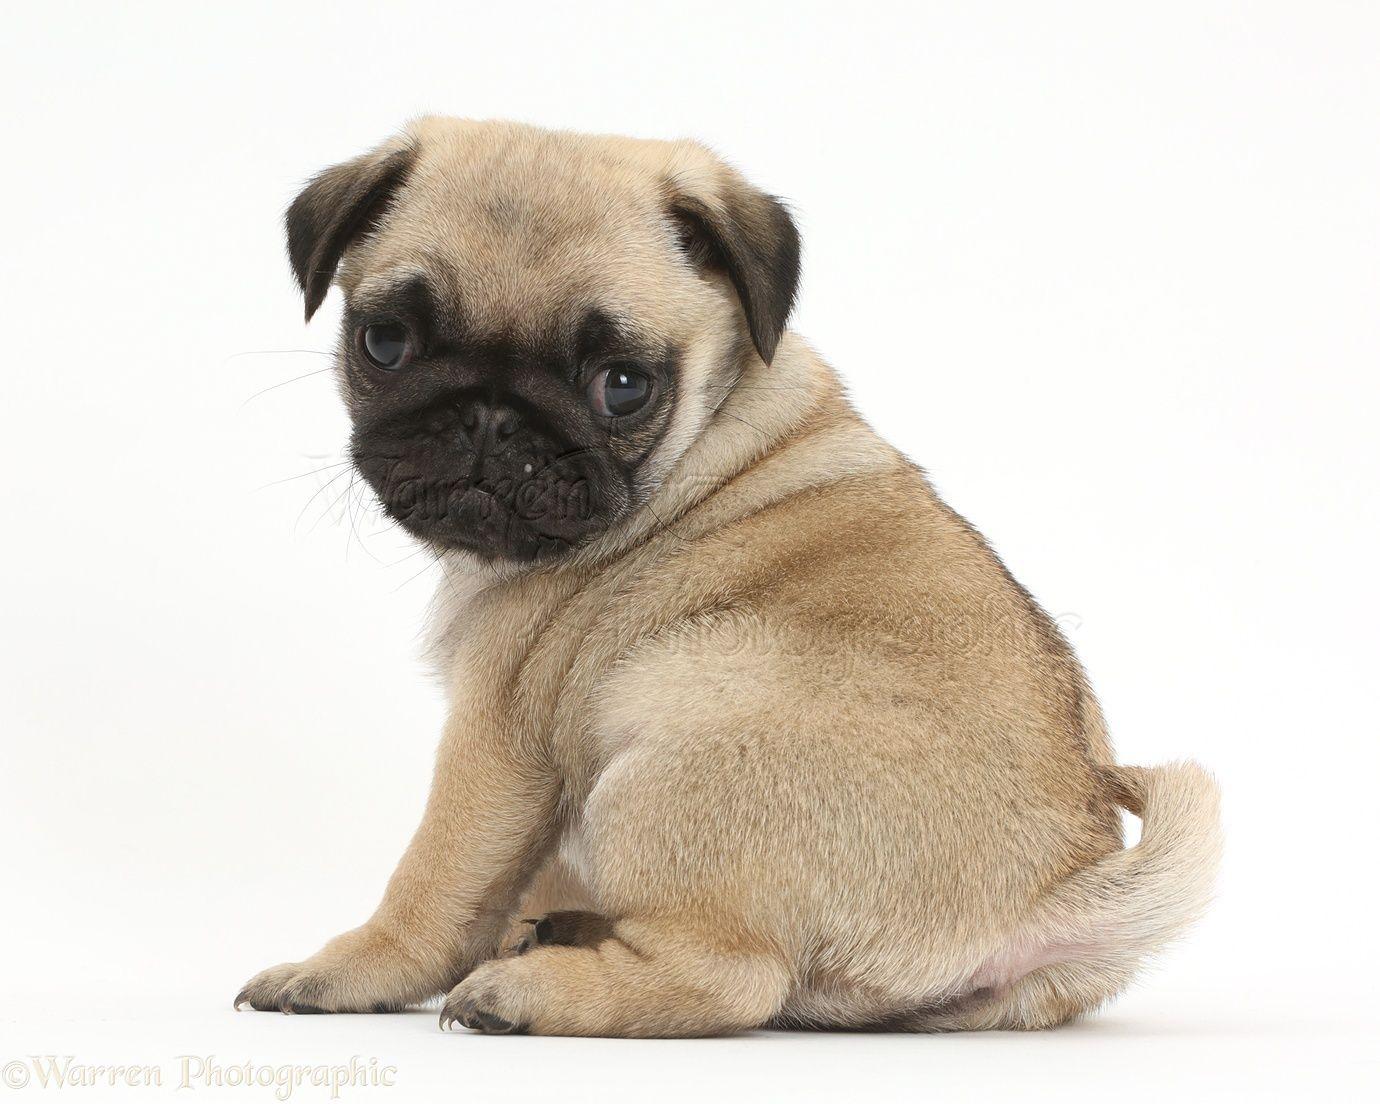 image of puppies Image Search Results. cute puppies